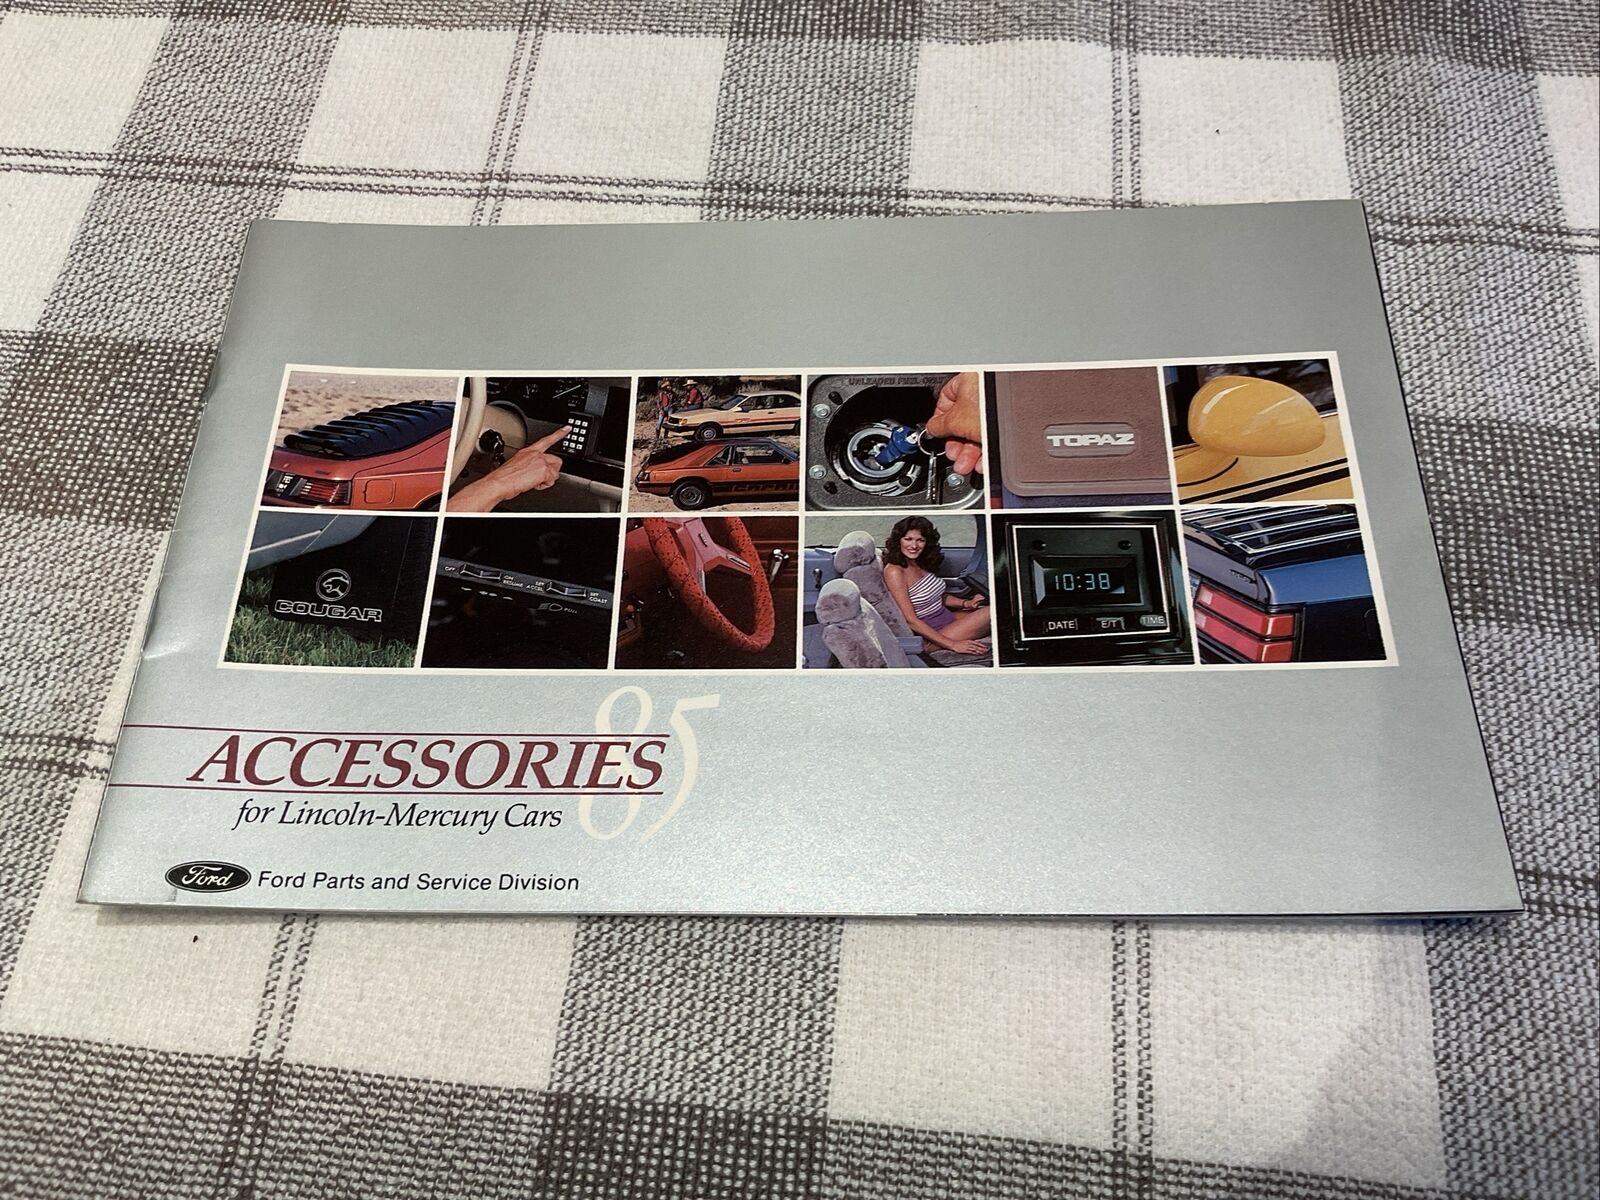 1985 Lincoln Mercury Cars Accessories advertising brochure